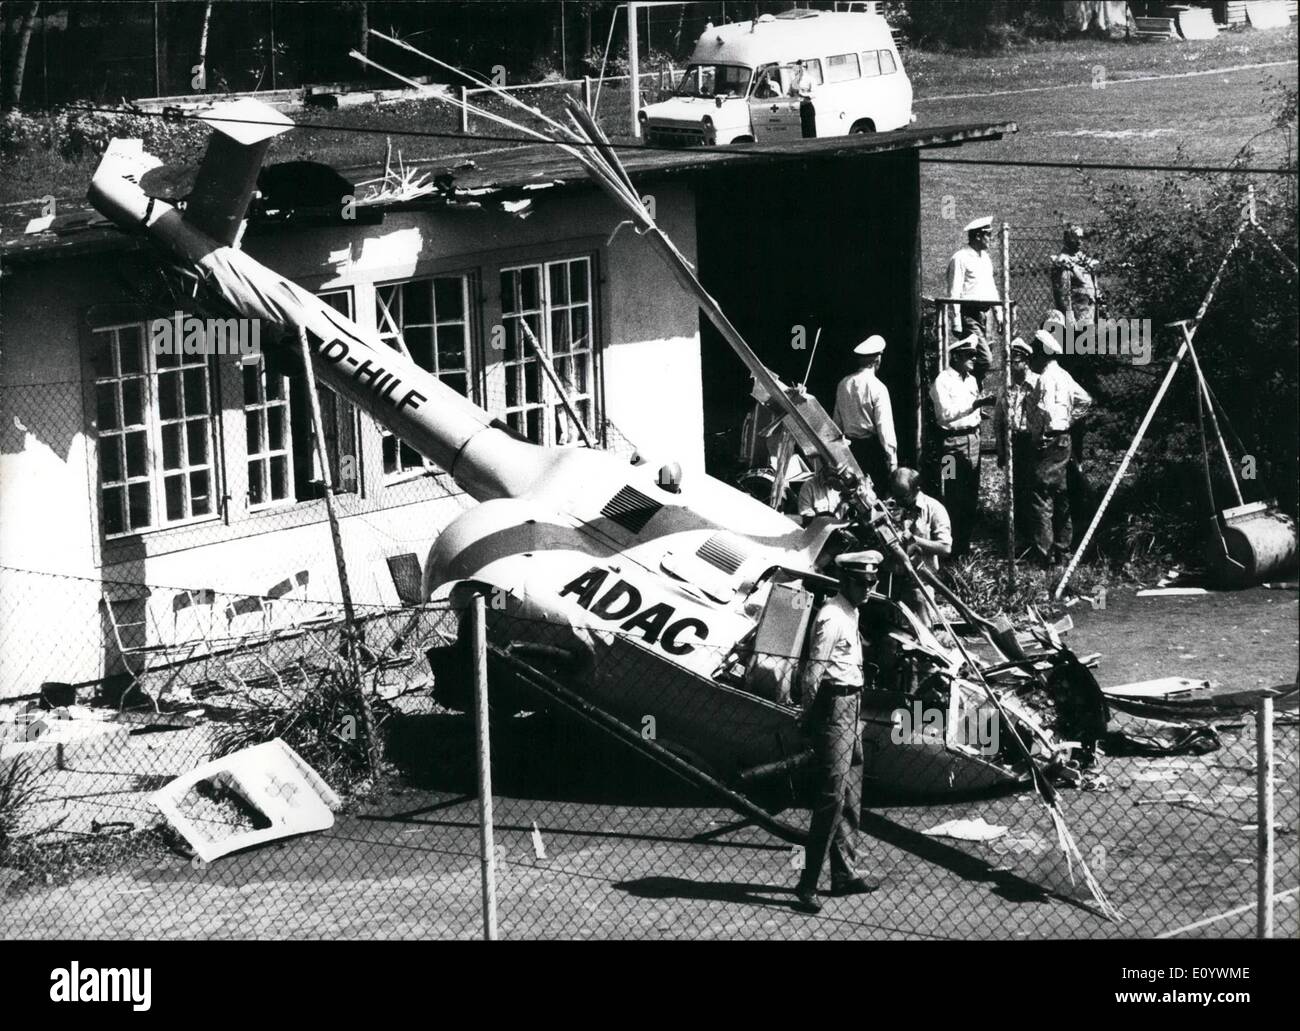 Aug. 08, 1971 - Tragic Accident of the ADAC-Rescue-Helicopter: The ADAC (general German automobil-club) rescue-helicopter ''Christoph'' (type BO 105 - Messerschmidt-Bolkow-Blohm) crashed during a rescue-flight on the sportsground of the Man-Company in Munich (West-Germany). The emergency-doctor Joachim Guskar (34) died, the pilot Ulrich Tramnau (34) and the ambulance-man Jochim Schulze (27) were badly injured. The helicopter was demanded because of a traffic-accident to take a badly helicopter was demanded because of a traffic-accident to take a badly injured boy to hospital Stock Photo